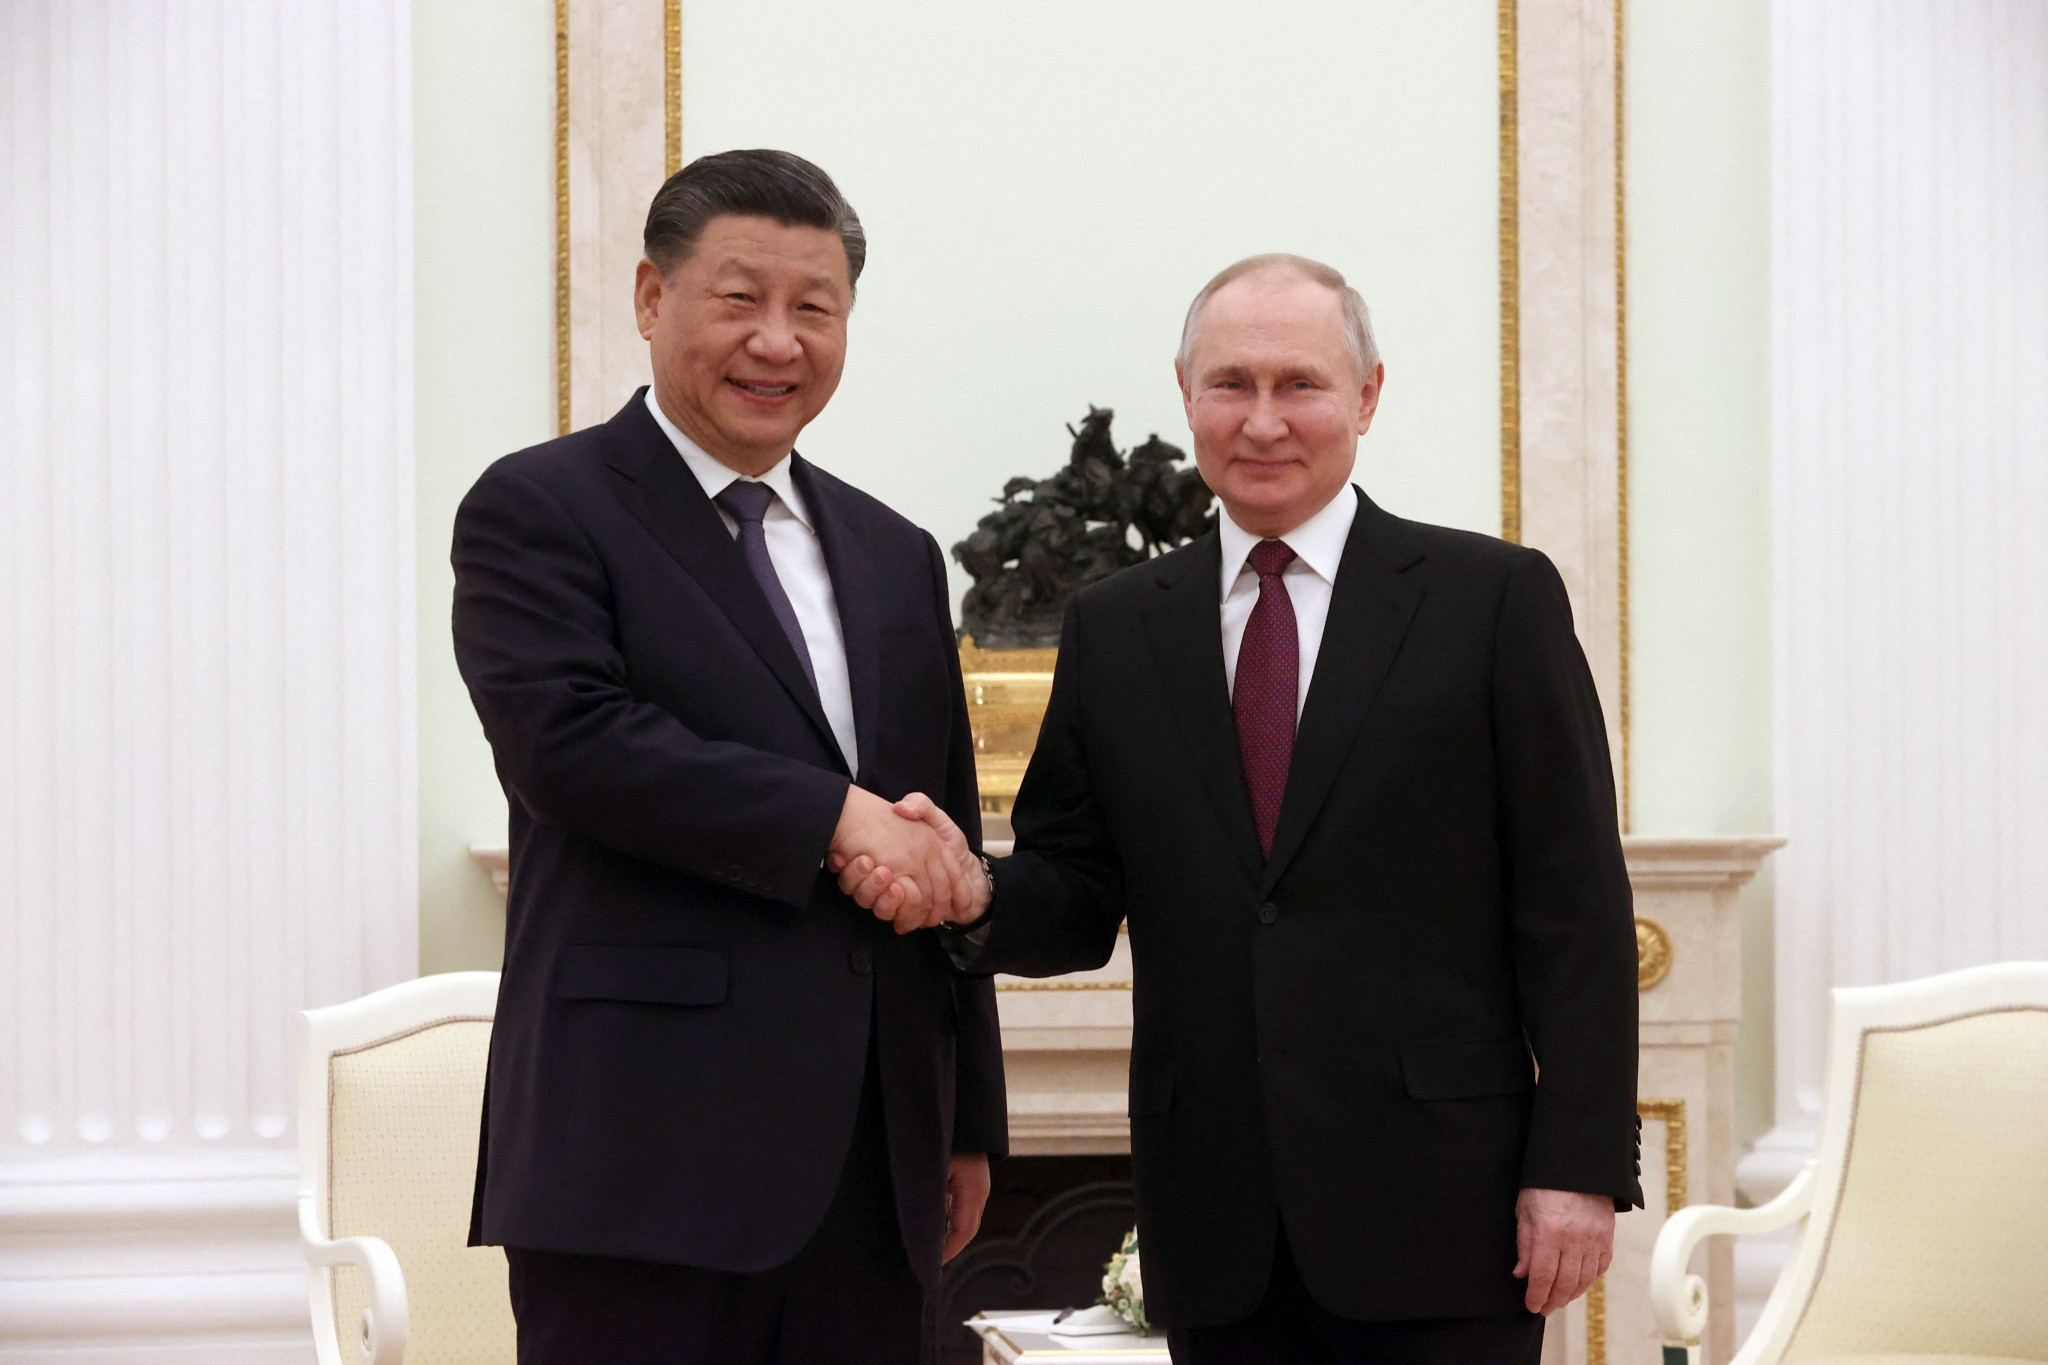 Xi Jinping and Vladimir Putin's meeting in Moscow is likely to attract attention from the Olympic corridors of power in Lausanne, our columnist predicts ©Getty Images